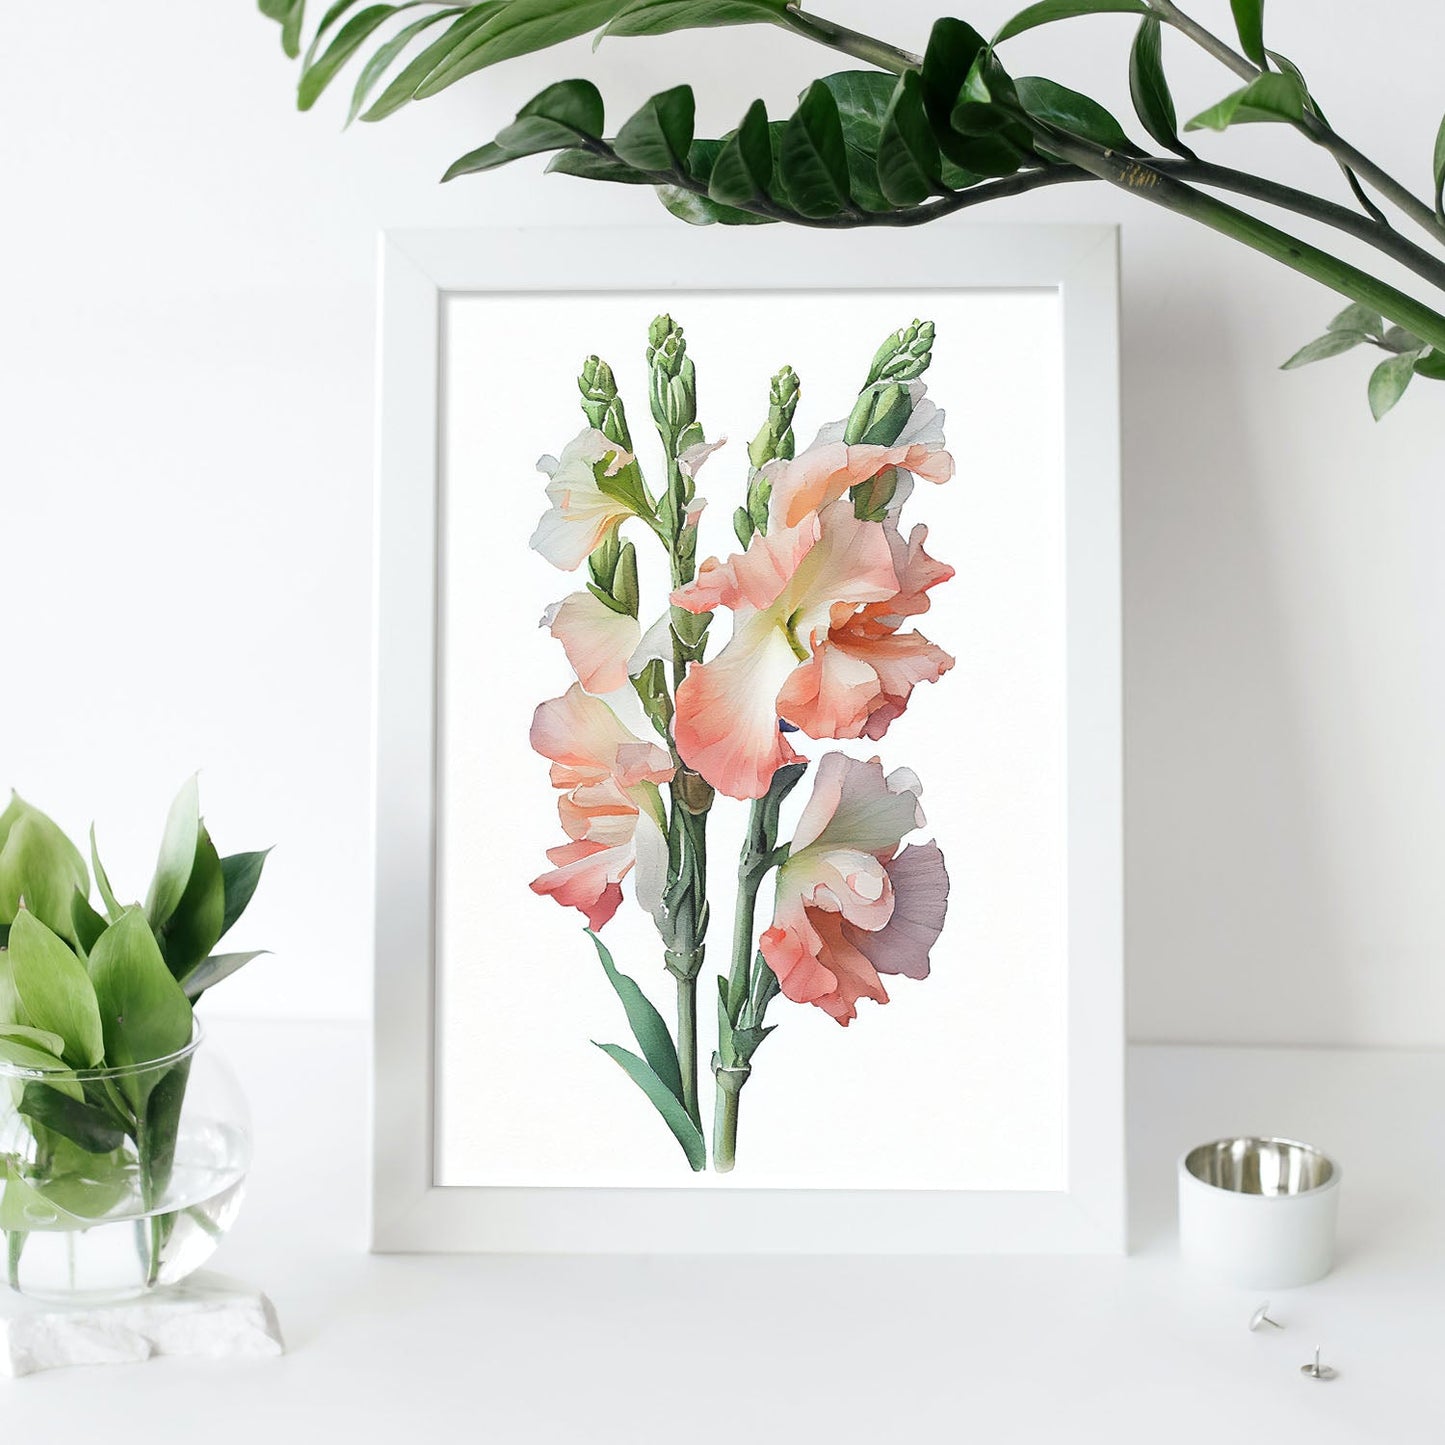 Nacnic watercolor minmal Gladiolus_2. Aesthetic Wall Art Prints for Bedroom or Living Room Design.